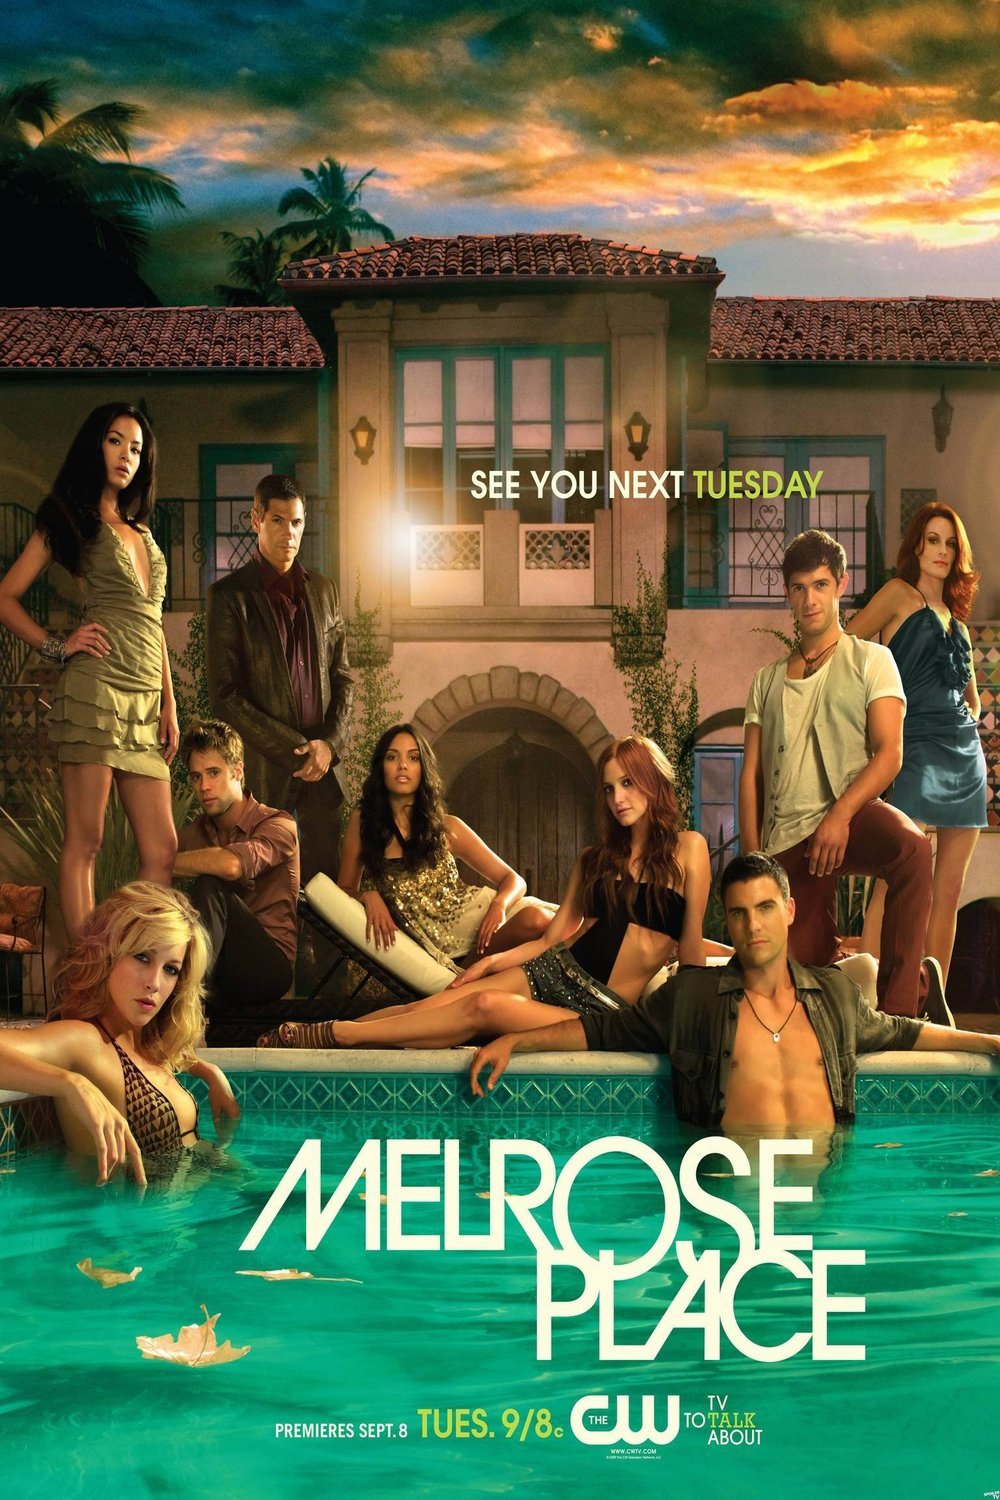 Poster of the movie Melrose Place